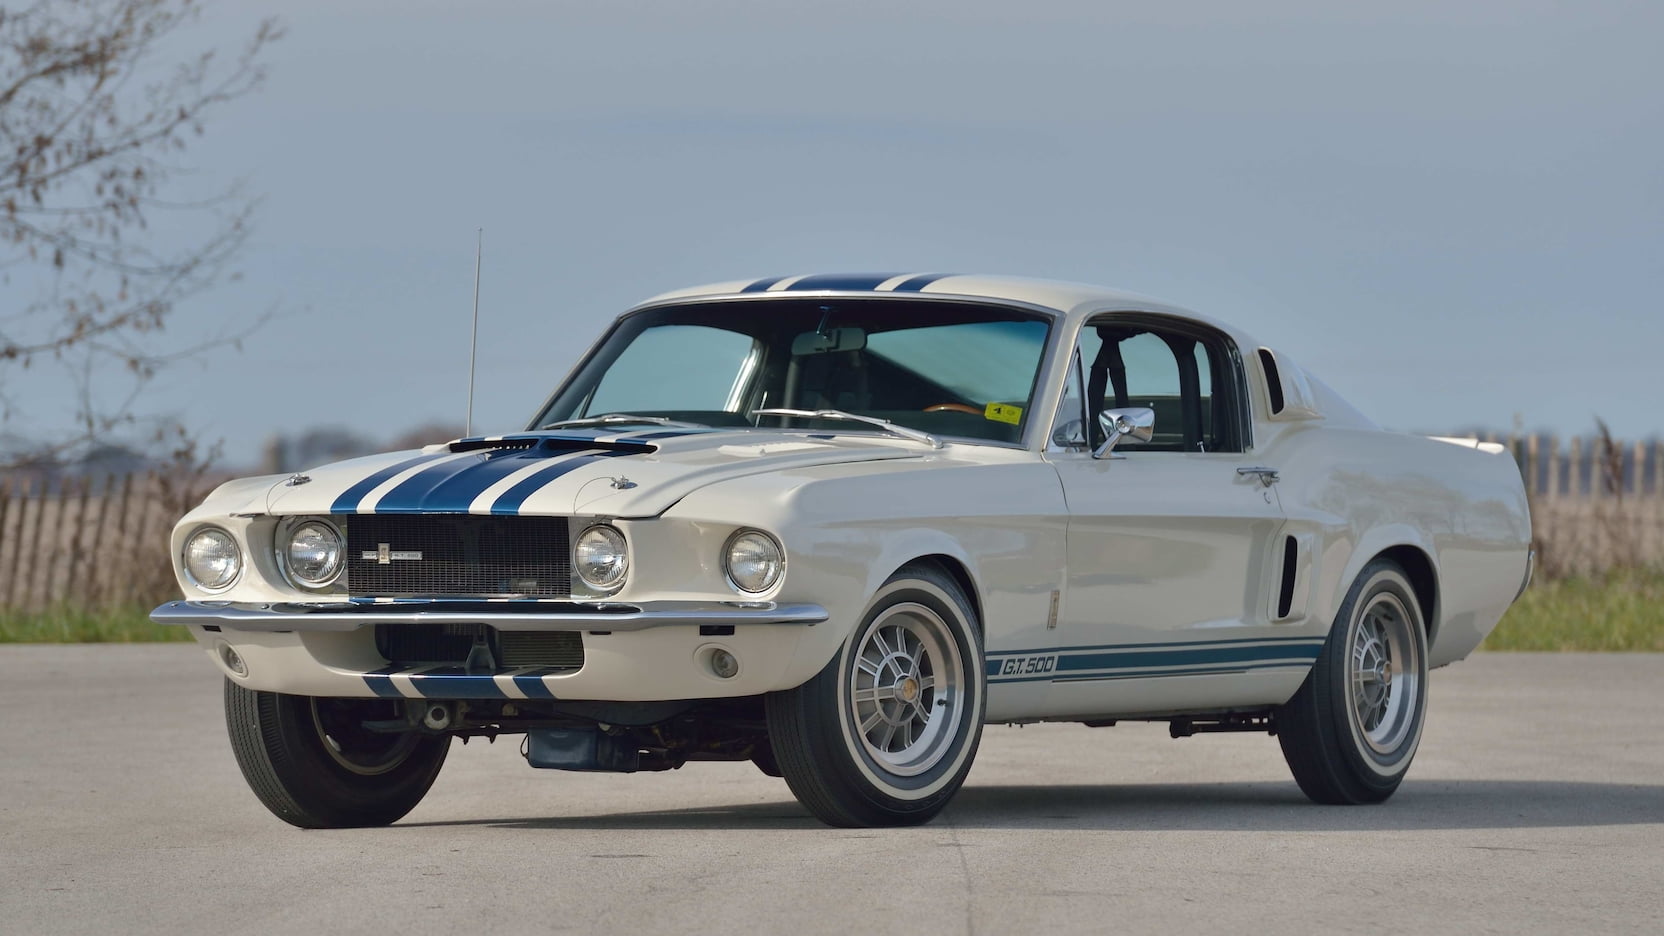 White 1967 GT500 Super Snake with blue racing stripes